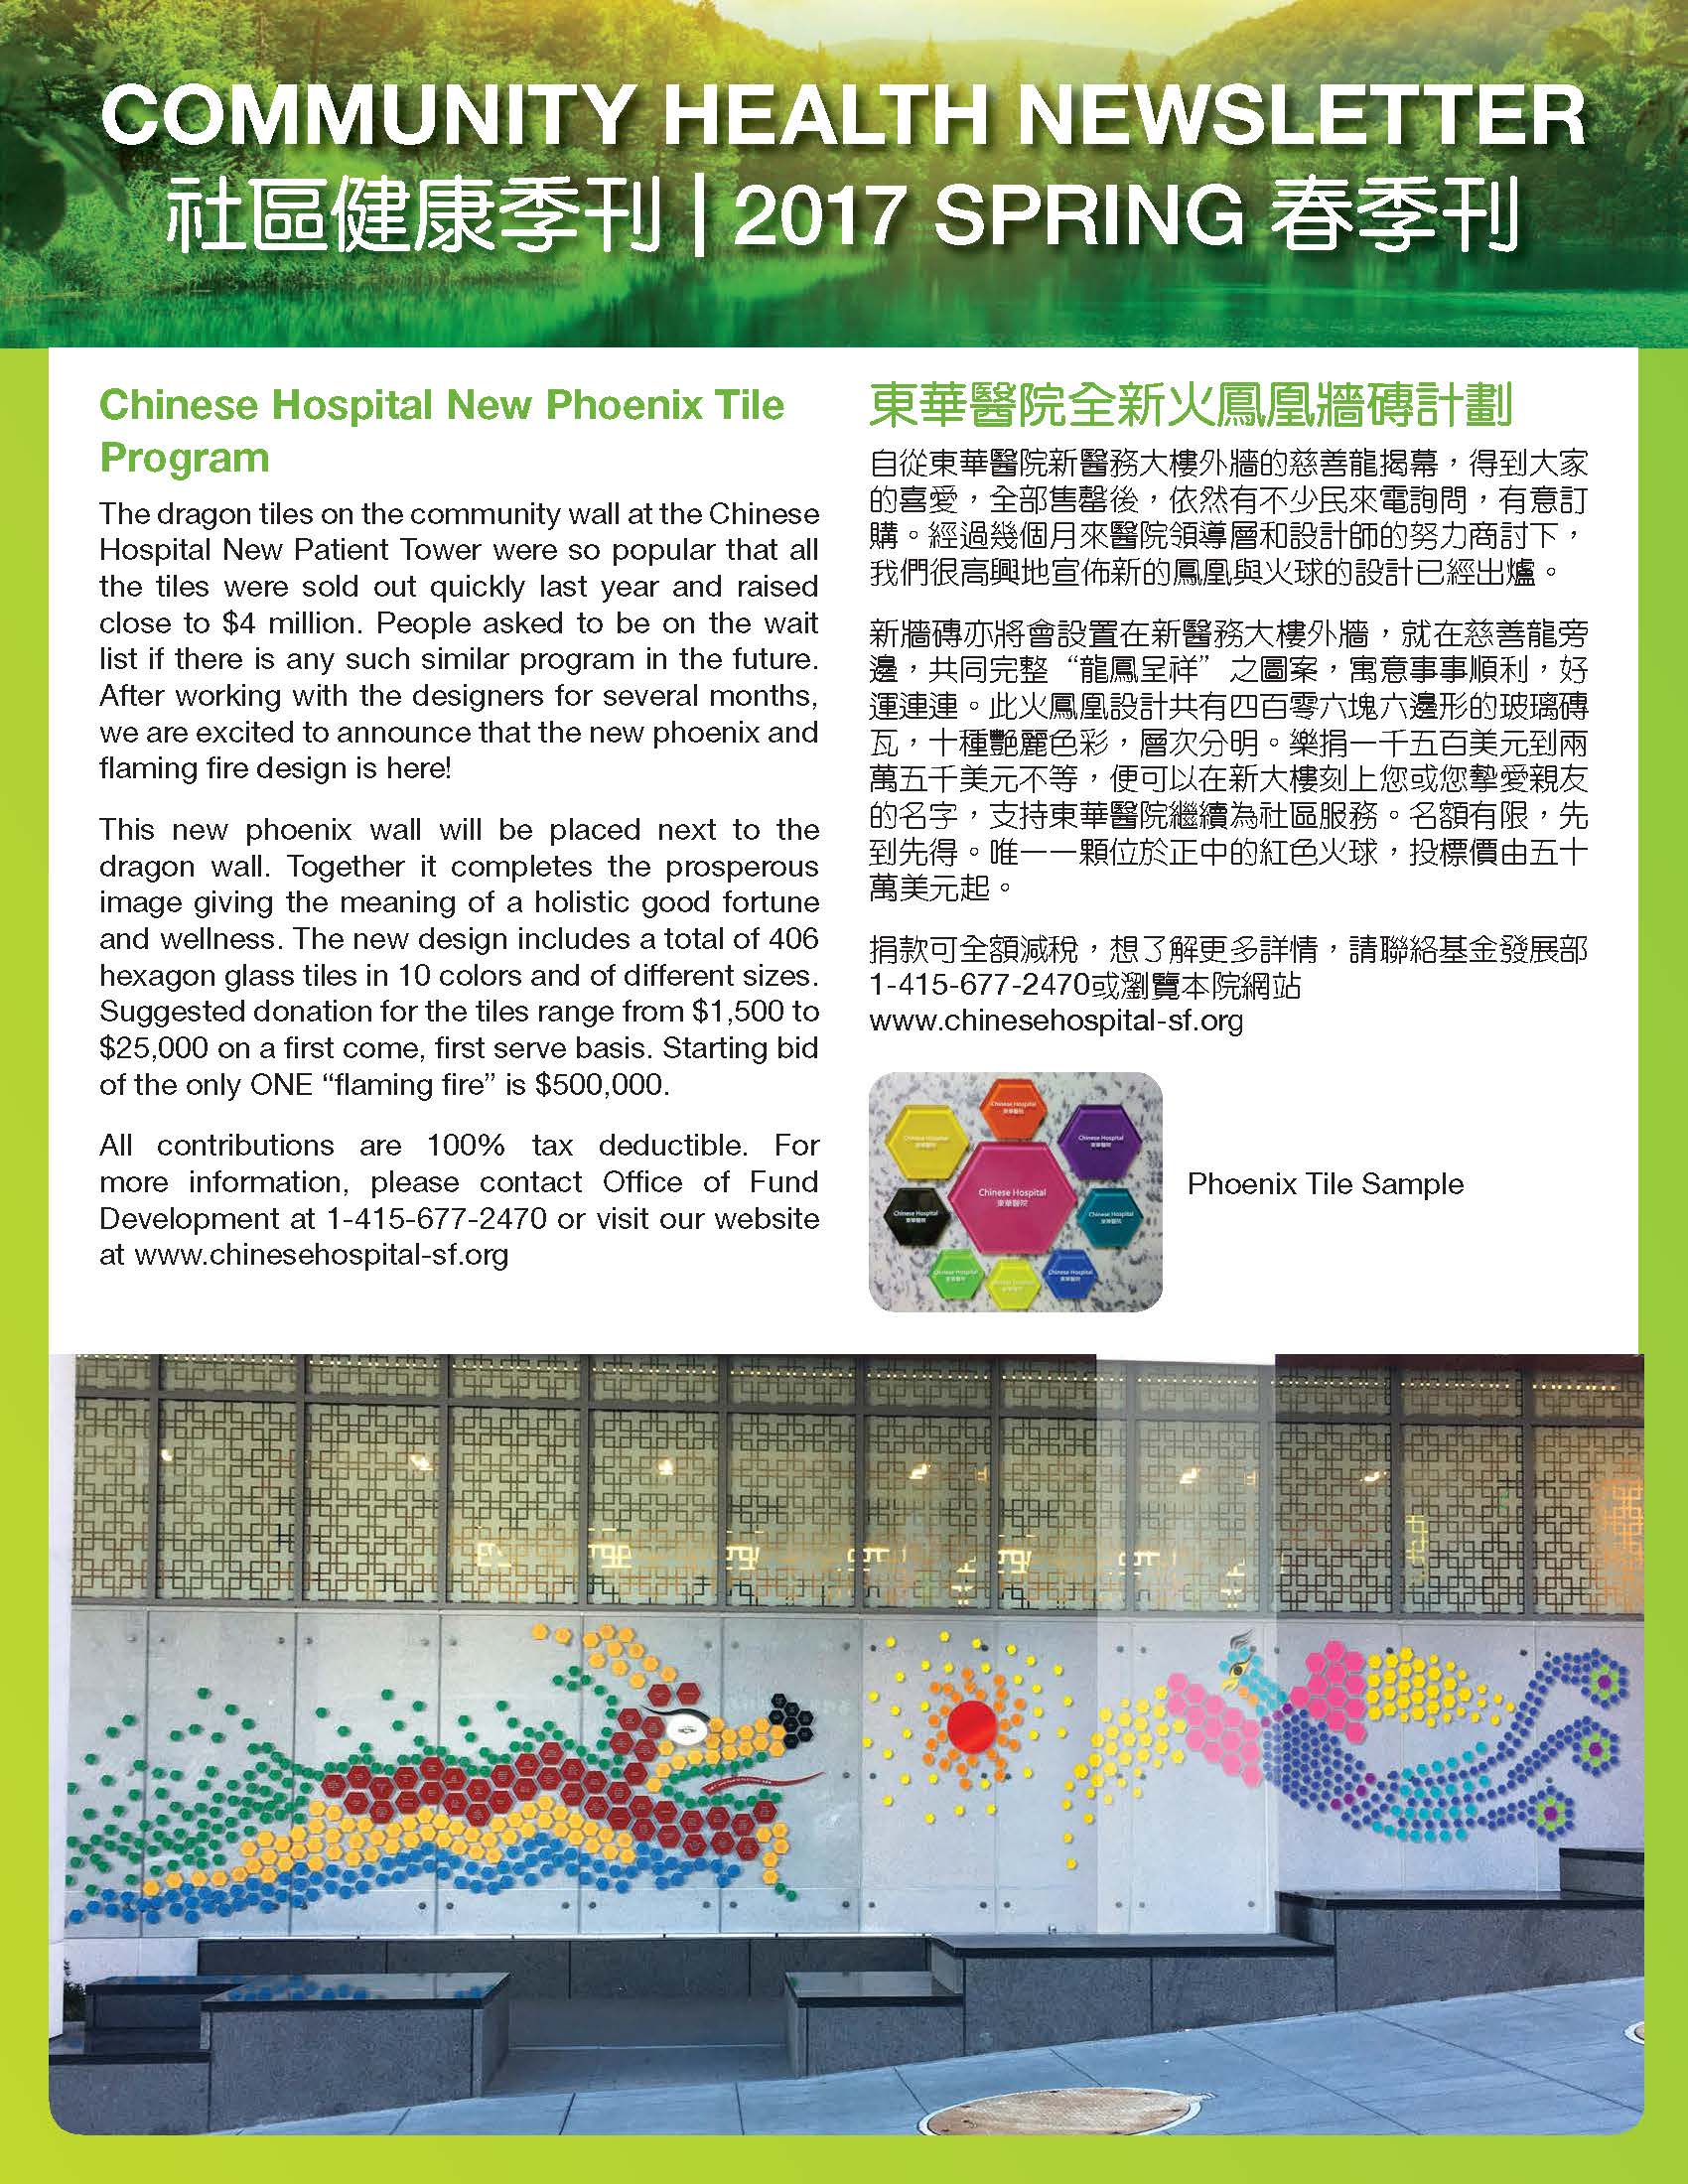 CCHP 2017 spring newsletter, information of Chinese Hospital